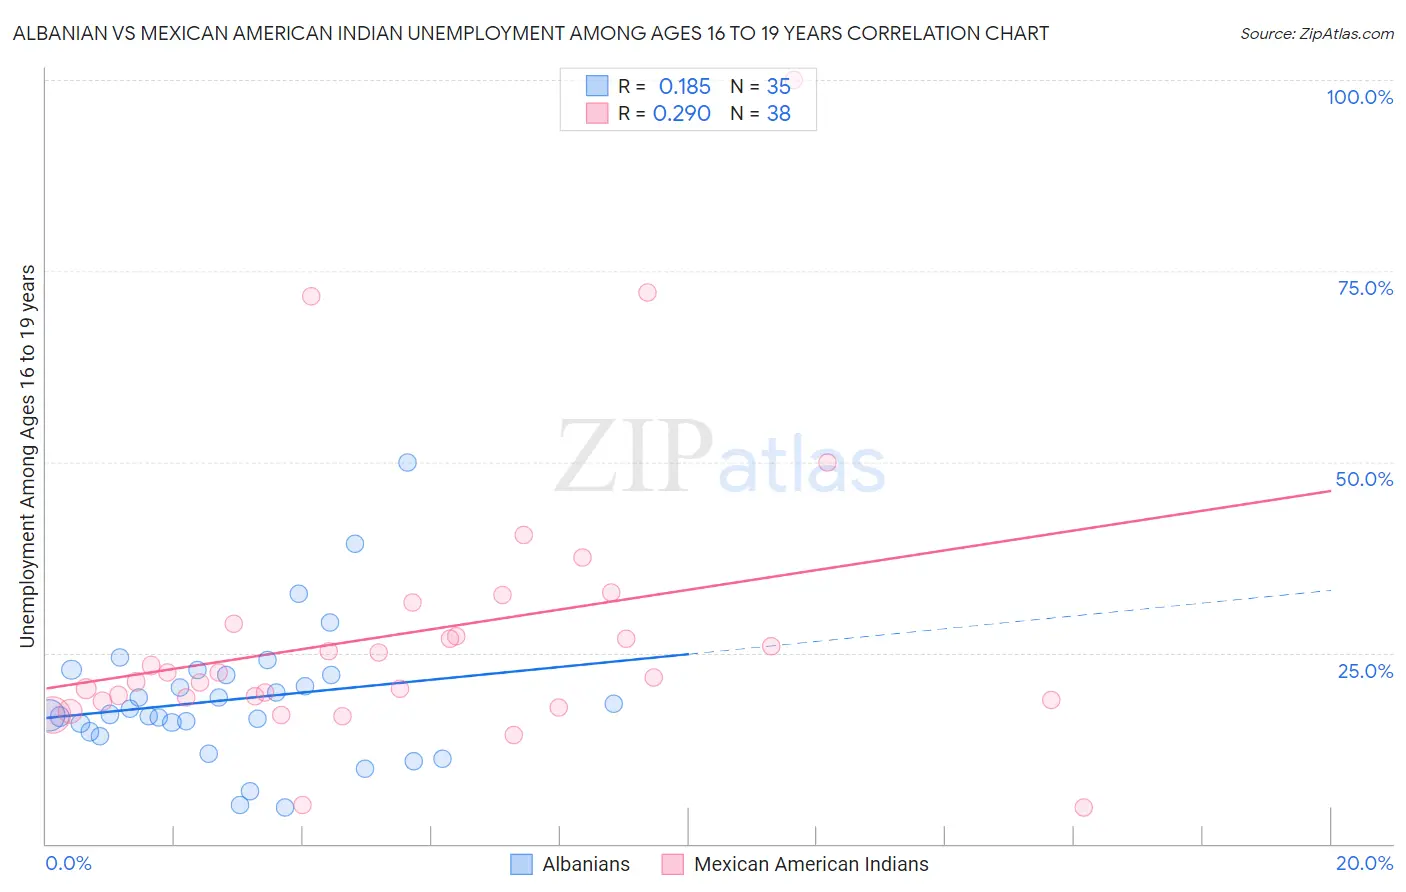 Albanian vs Mexican American Indian Unemployment Among Ages 16 to 19 years